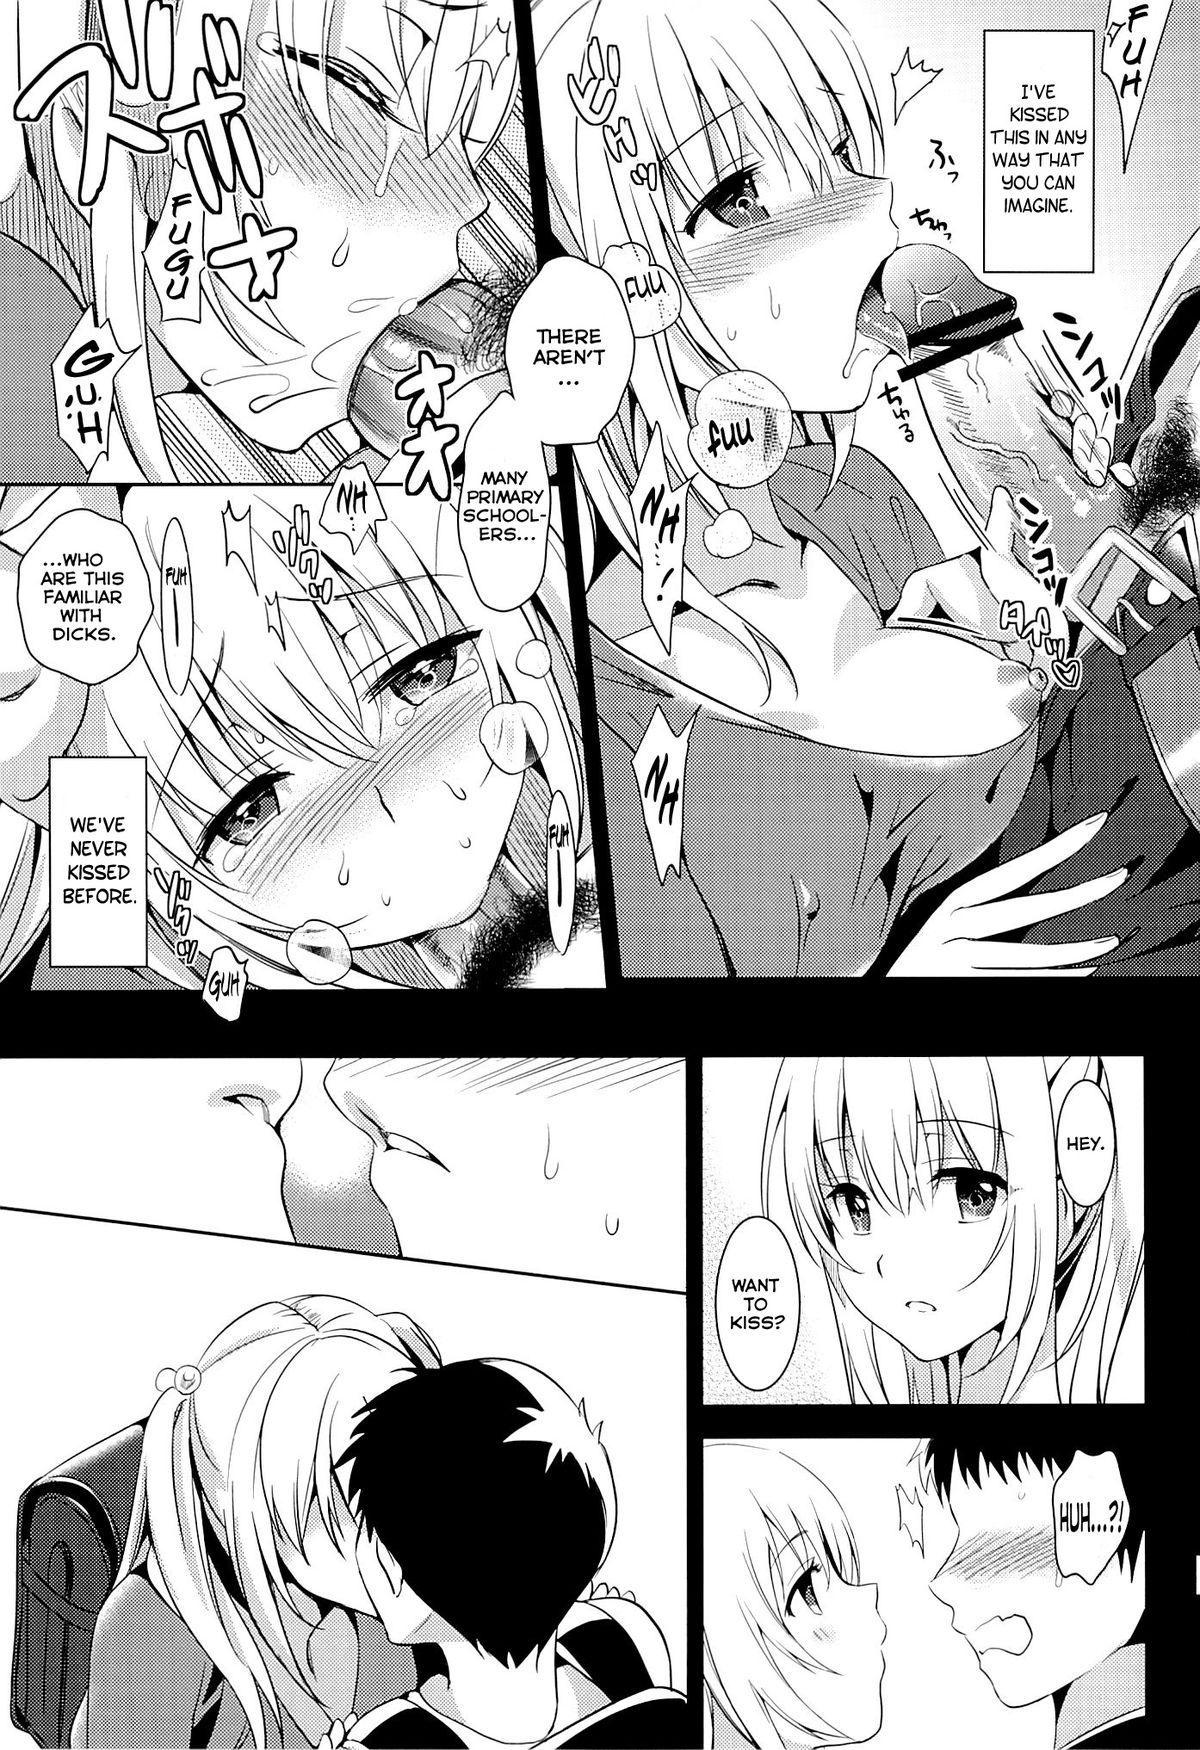 European IMOUTO COLLECTION Public Nudity - Page 7